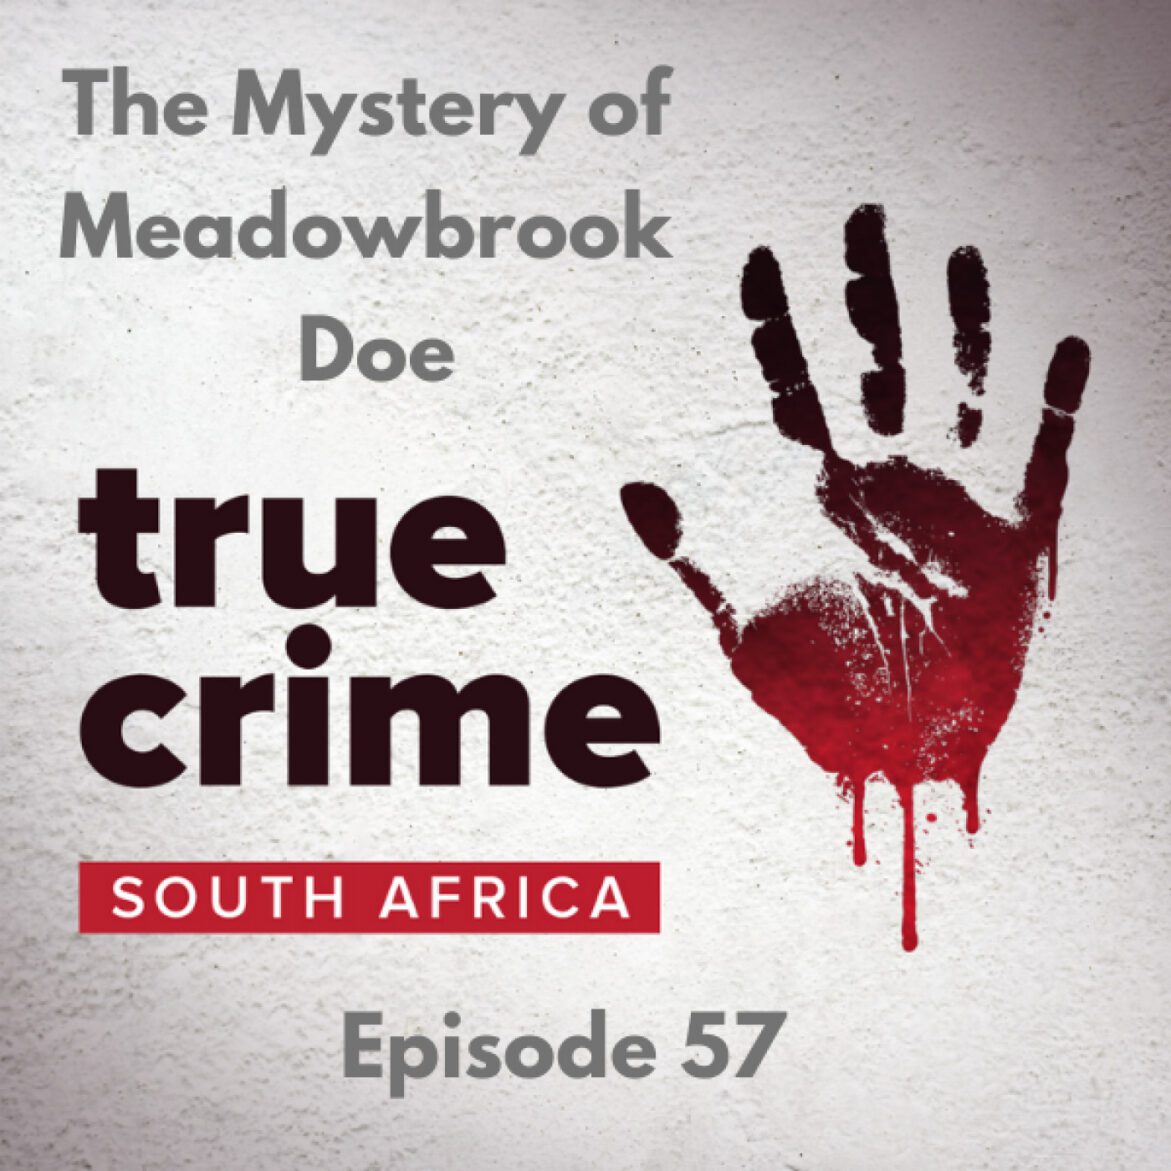 Black Podcasting - Episode 57 - The Mystery of Meadowbrook Doe